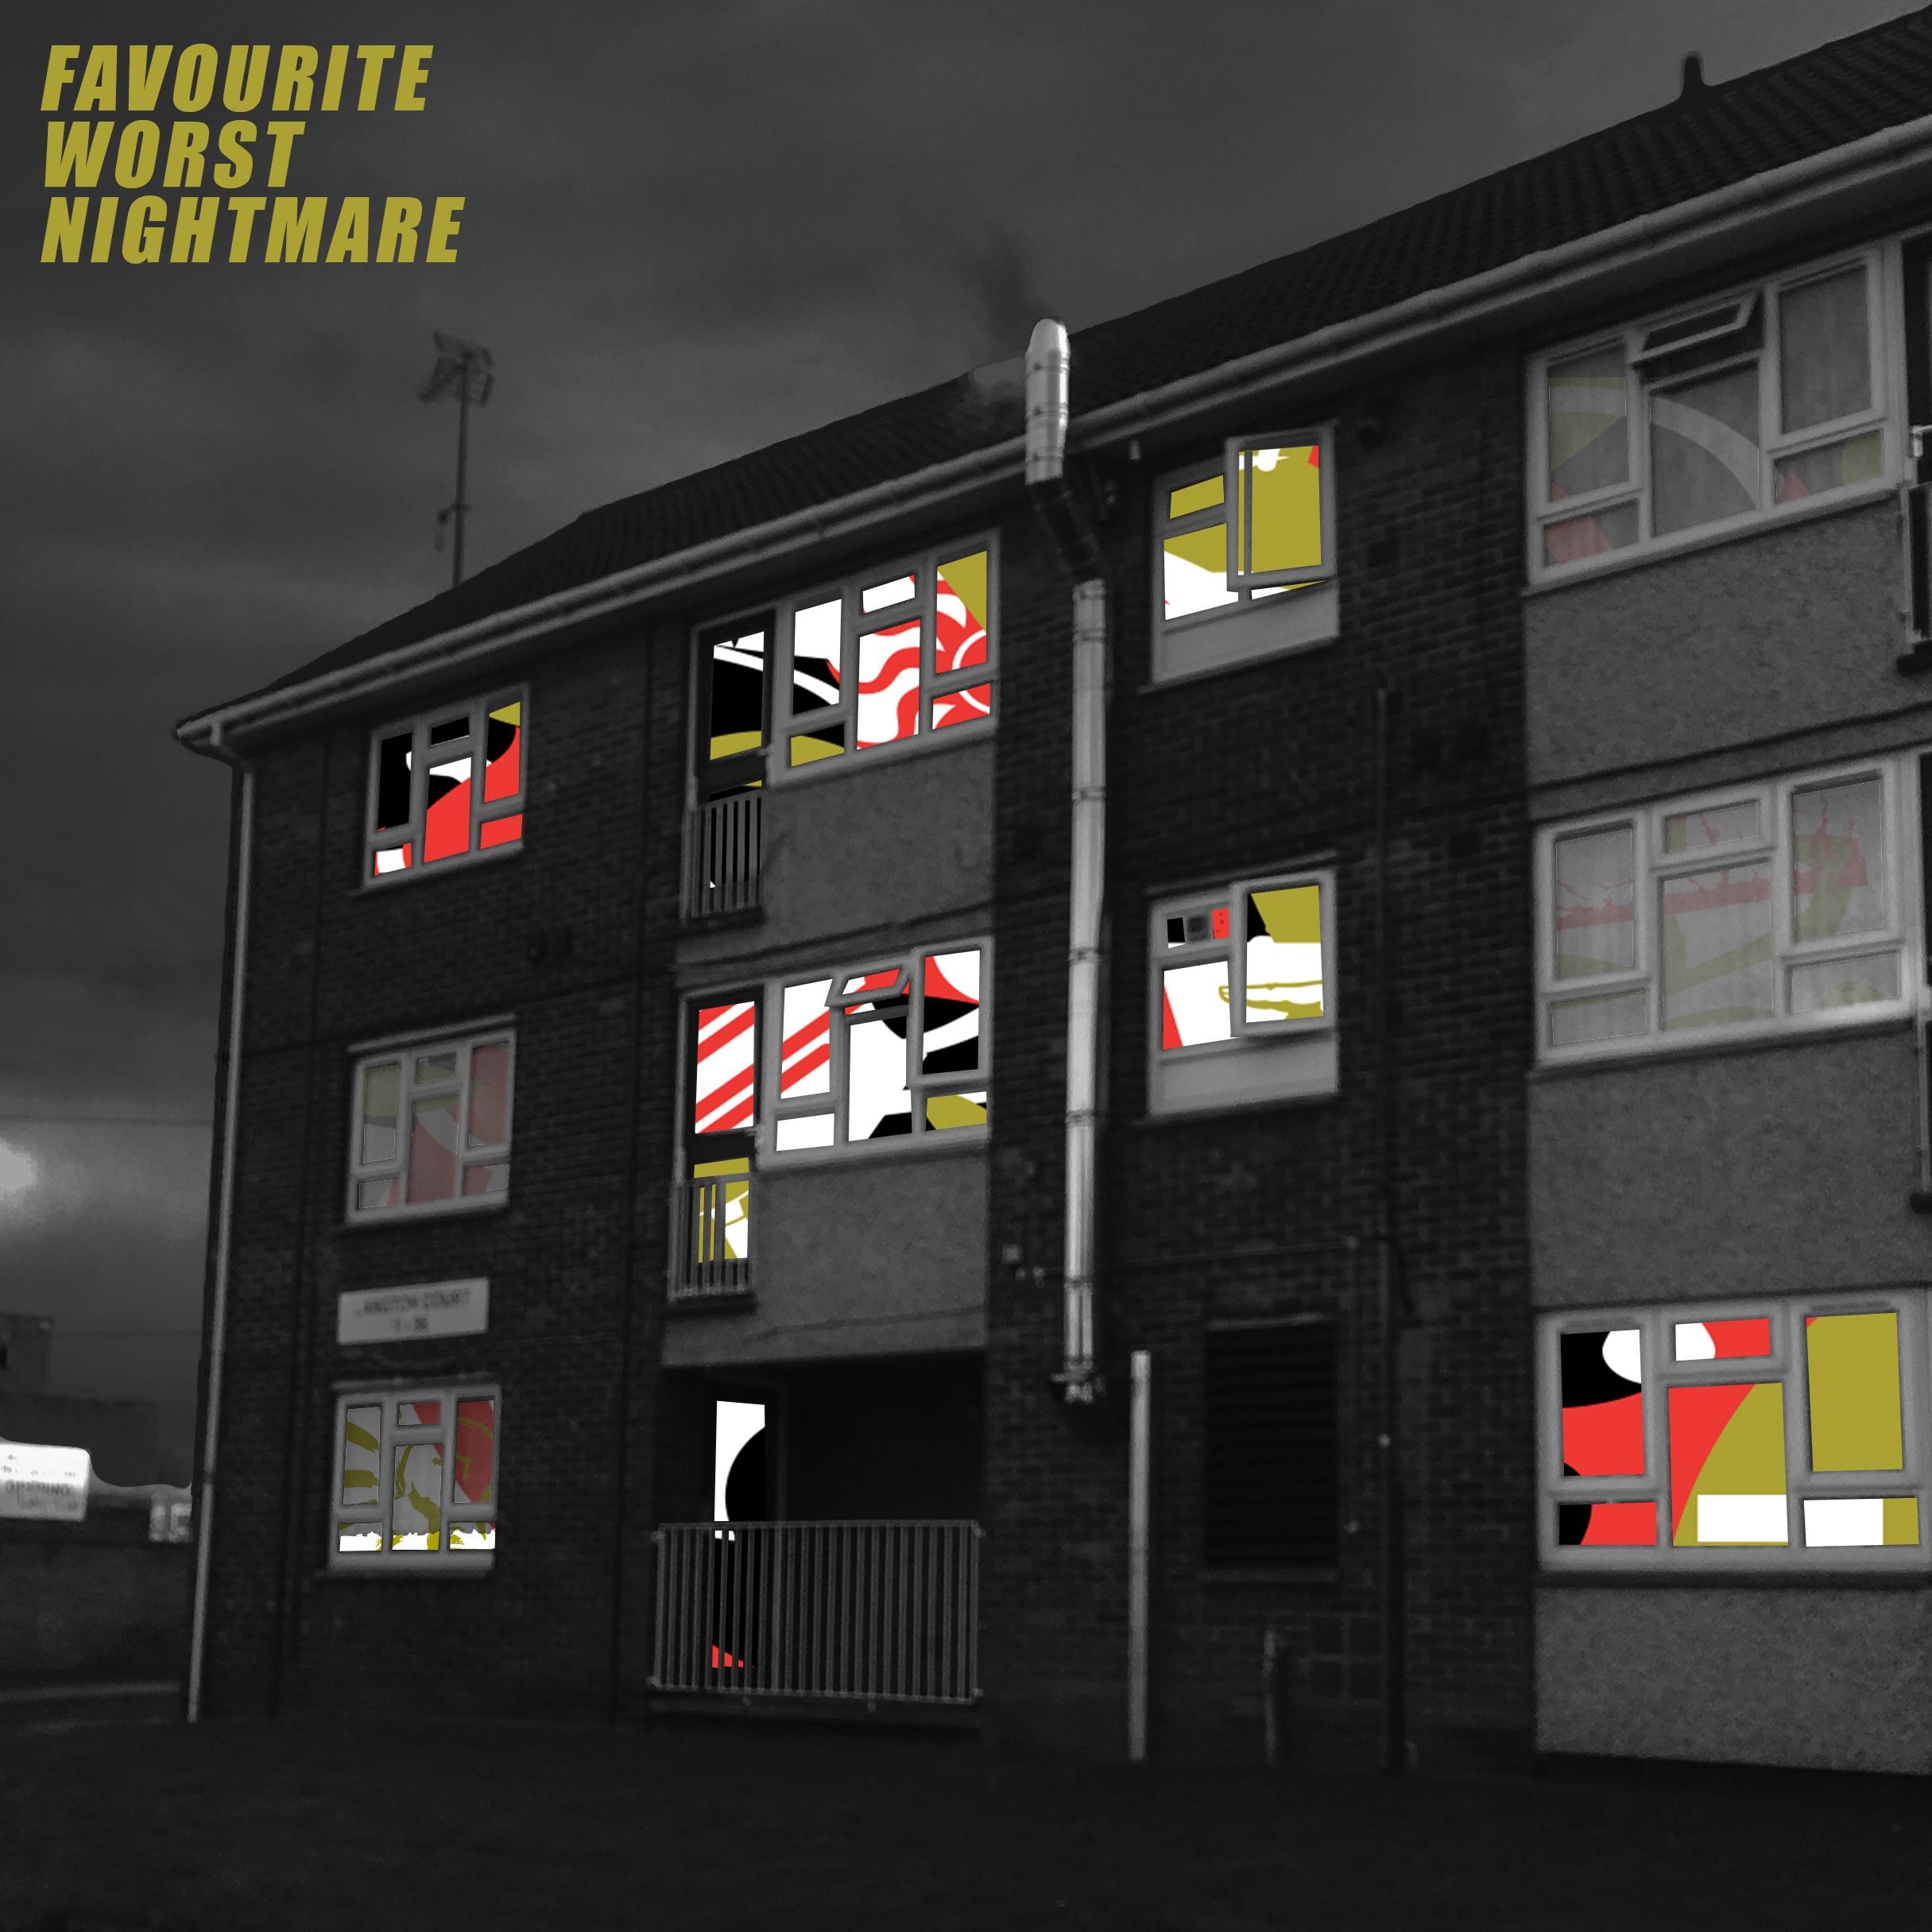 I responded to Favourite Worst Nightmare for my photography project at school